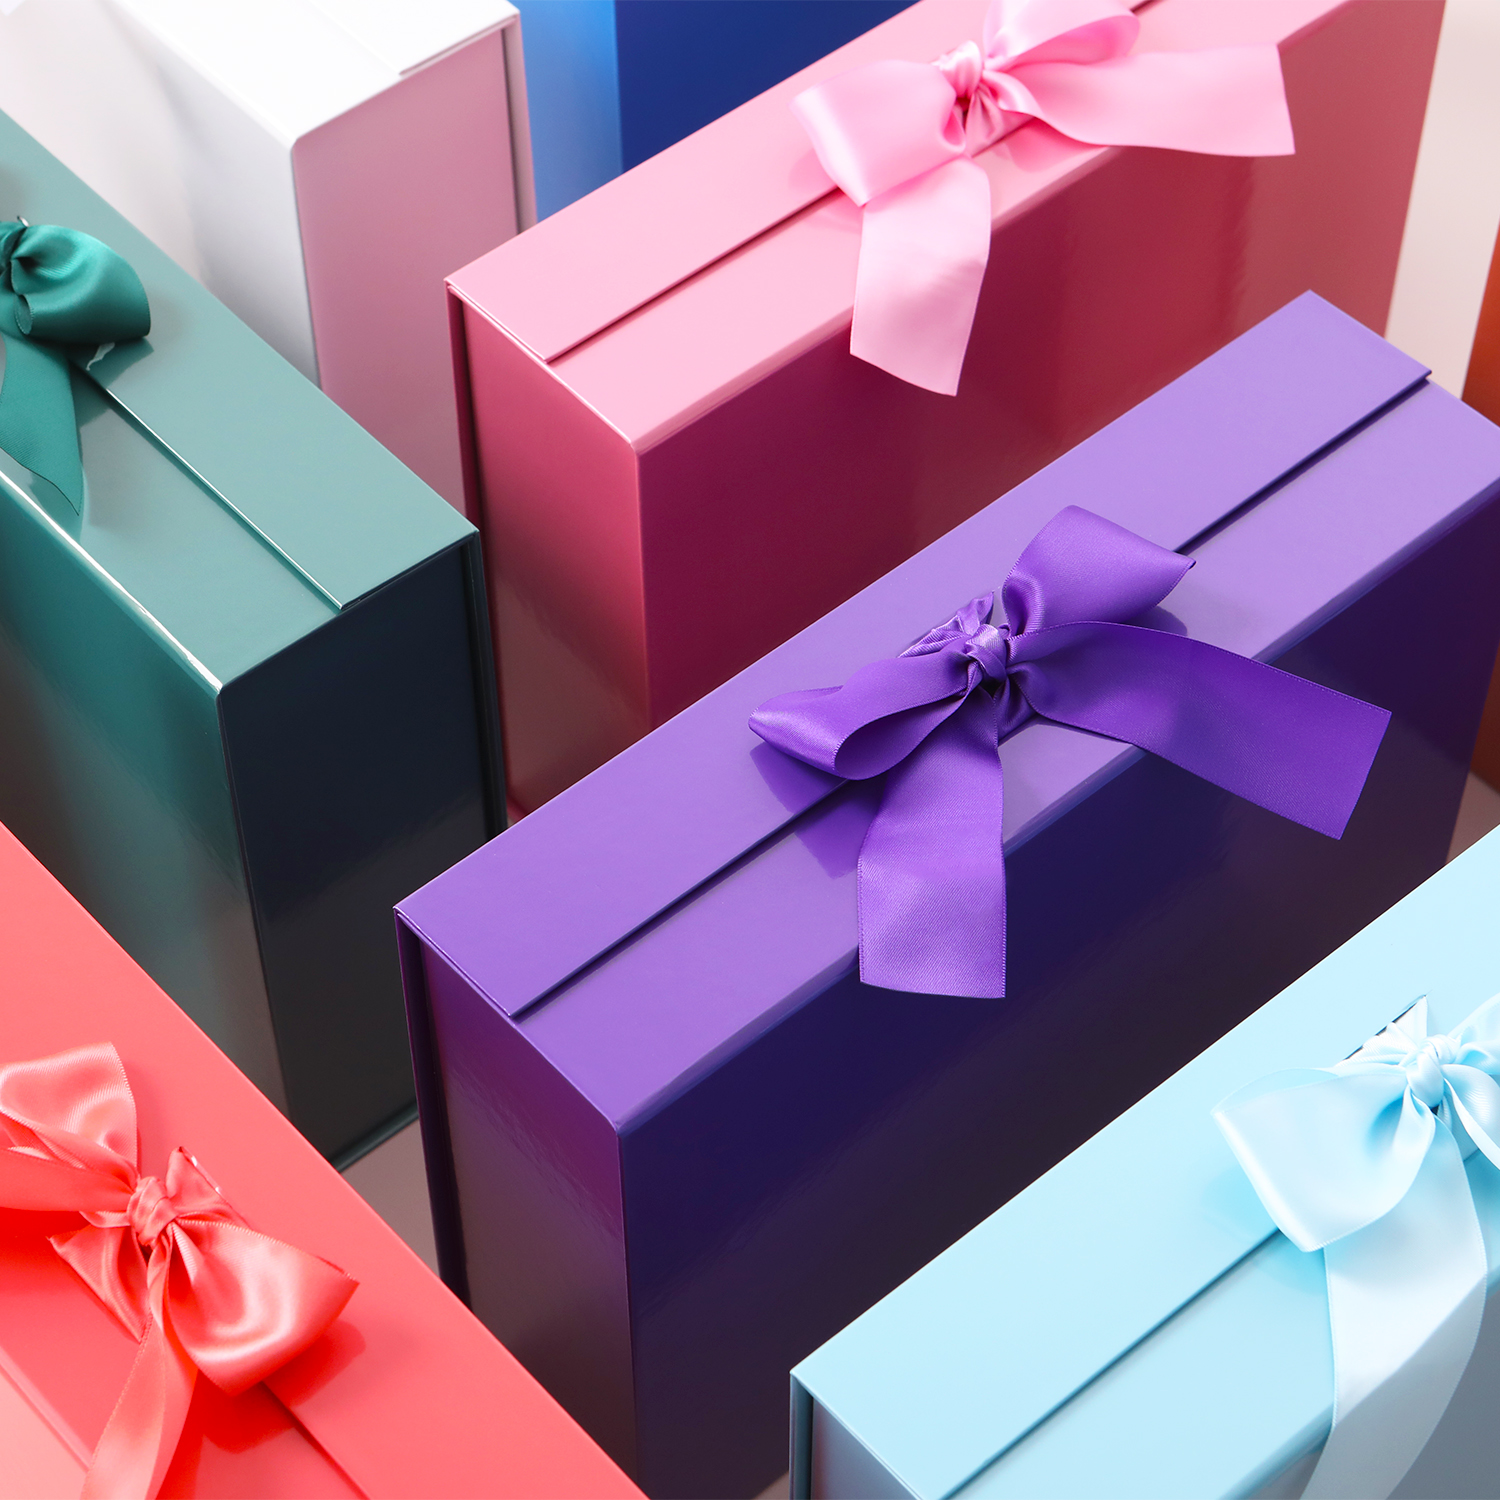 PKGSMART 5 Large Gift Boxes with Ribbons, Pink Gift Boxes with